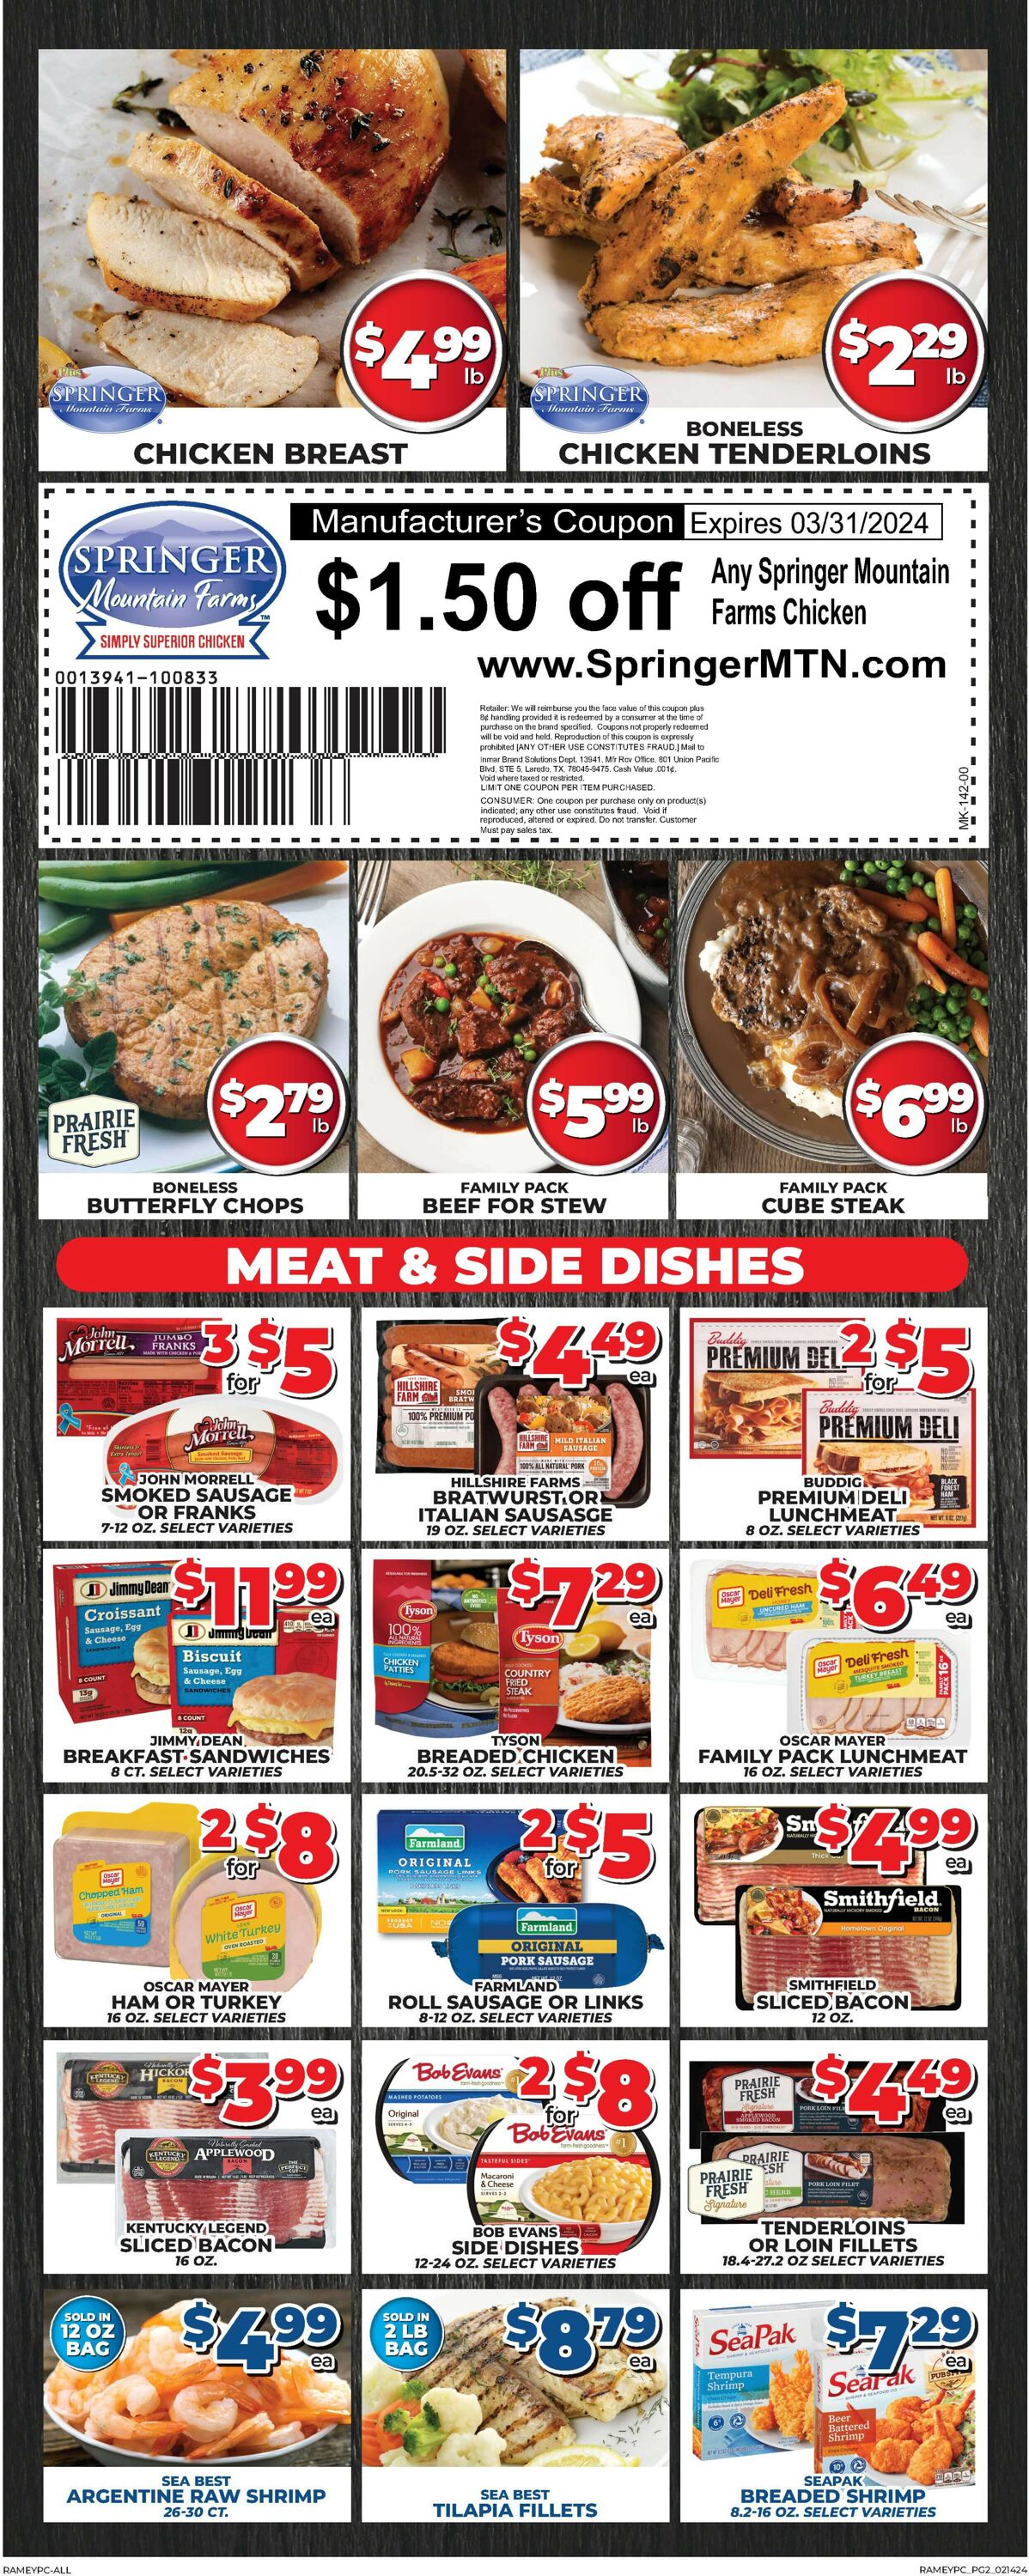 Price Cutter Weekly Ad Circular - valid 02/14-02/20/2024 (Page 2)